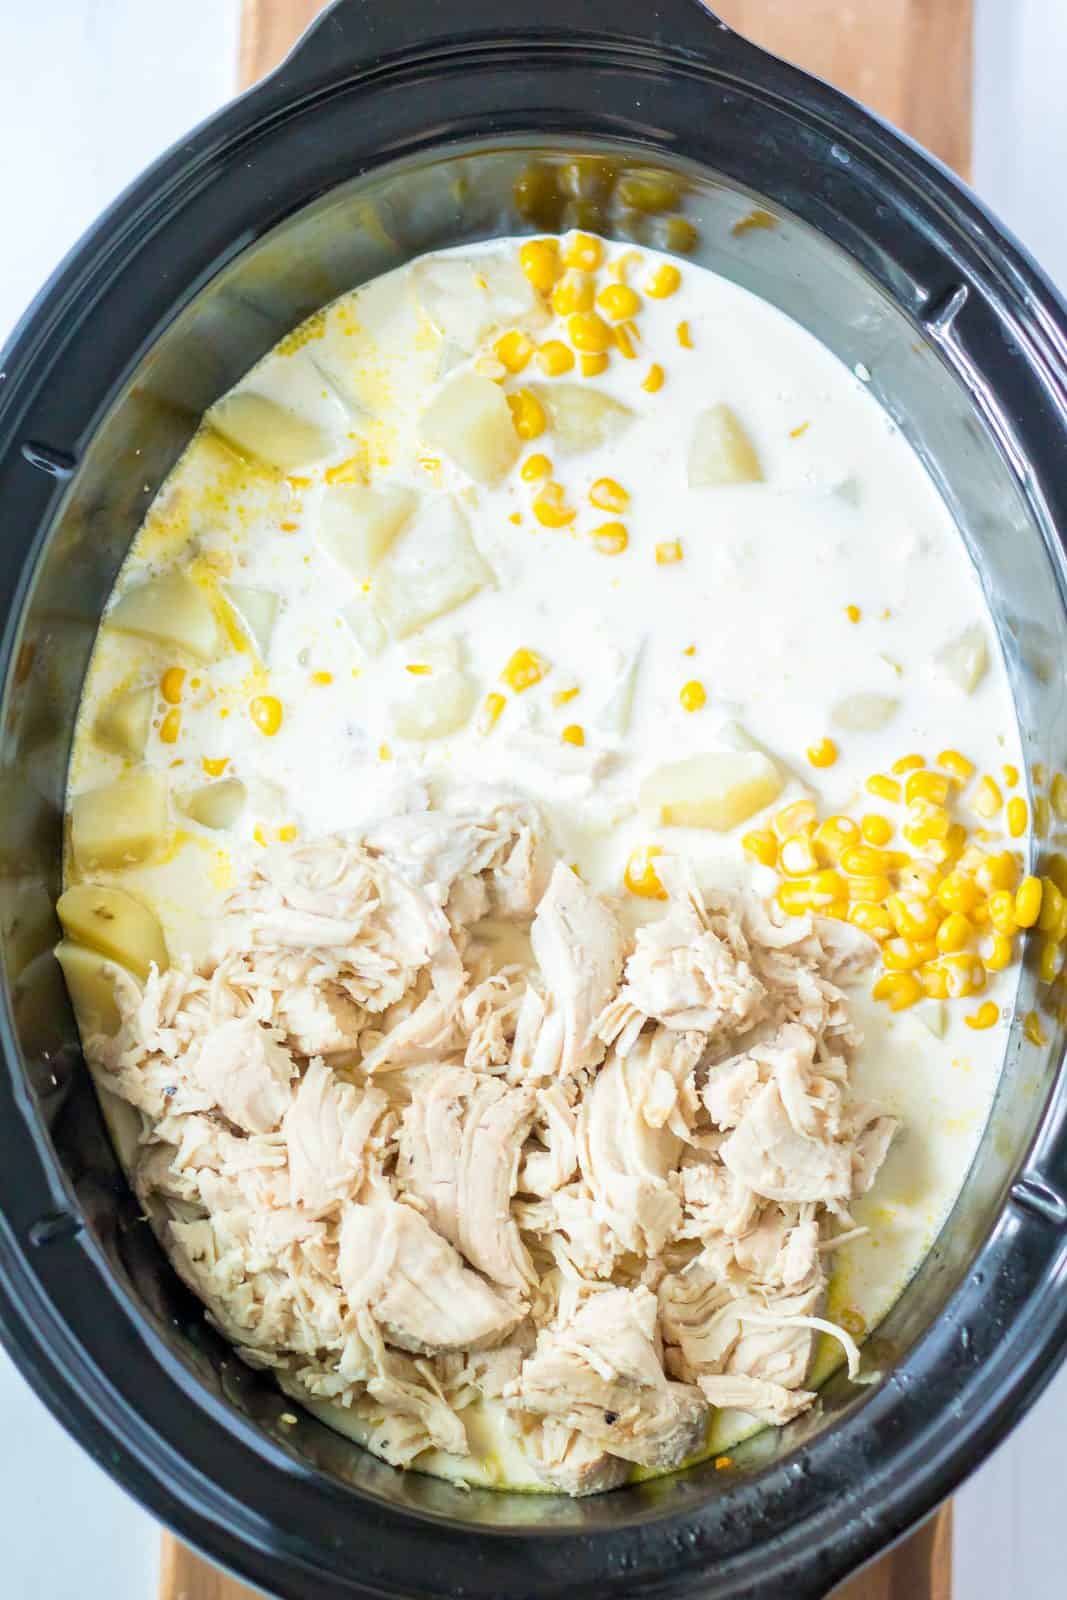 cream, cubed potatoes, onion, chicken broth, chopped turkey and heavy cream shown in a black oval crock pot. 